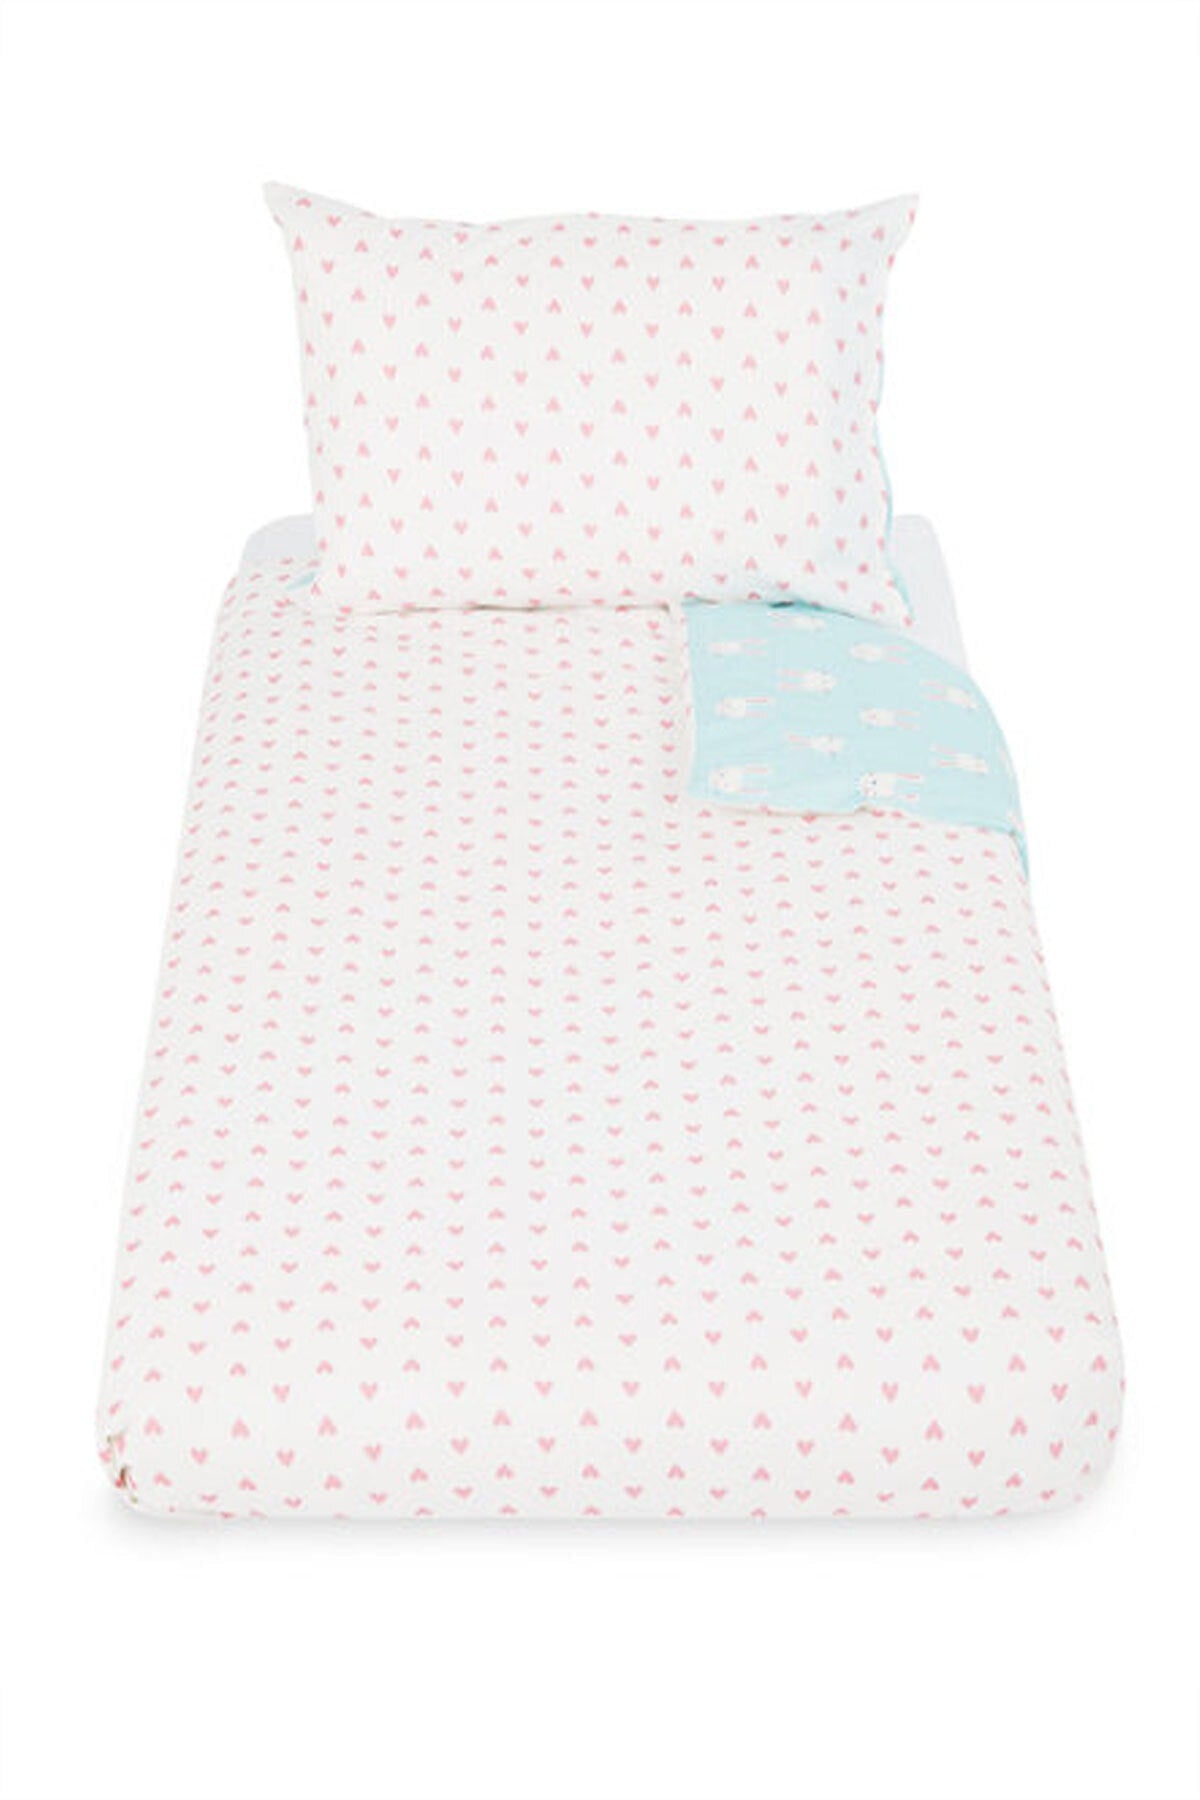 Double Sided Baby Bedding Set Bunny